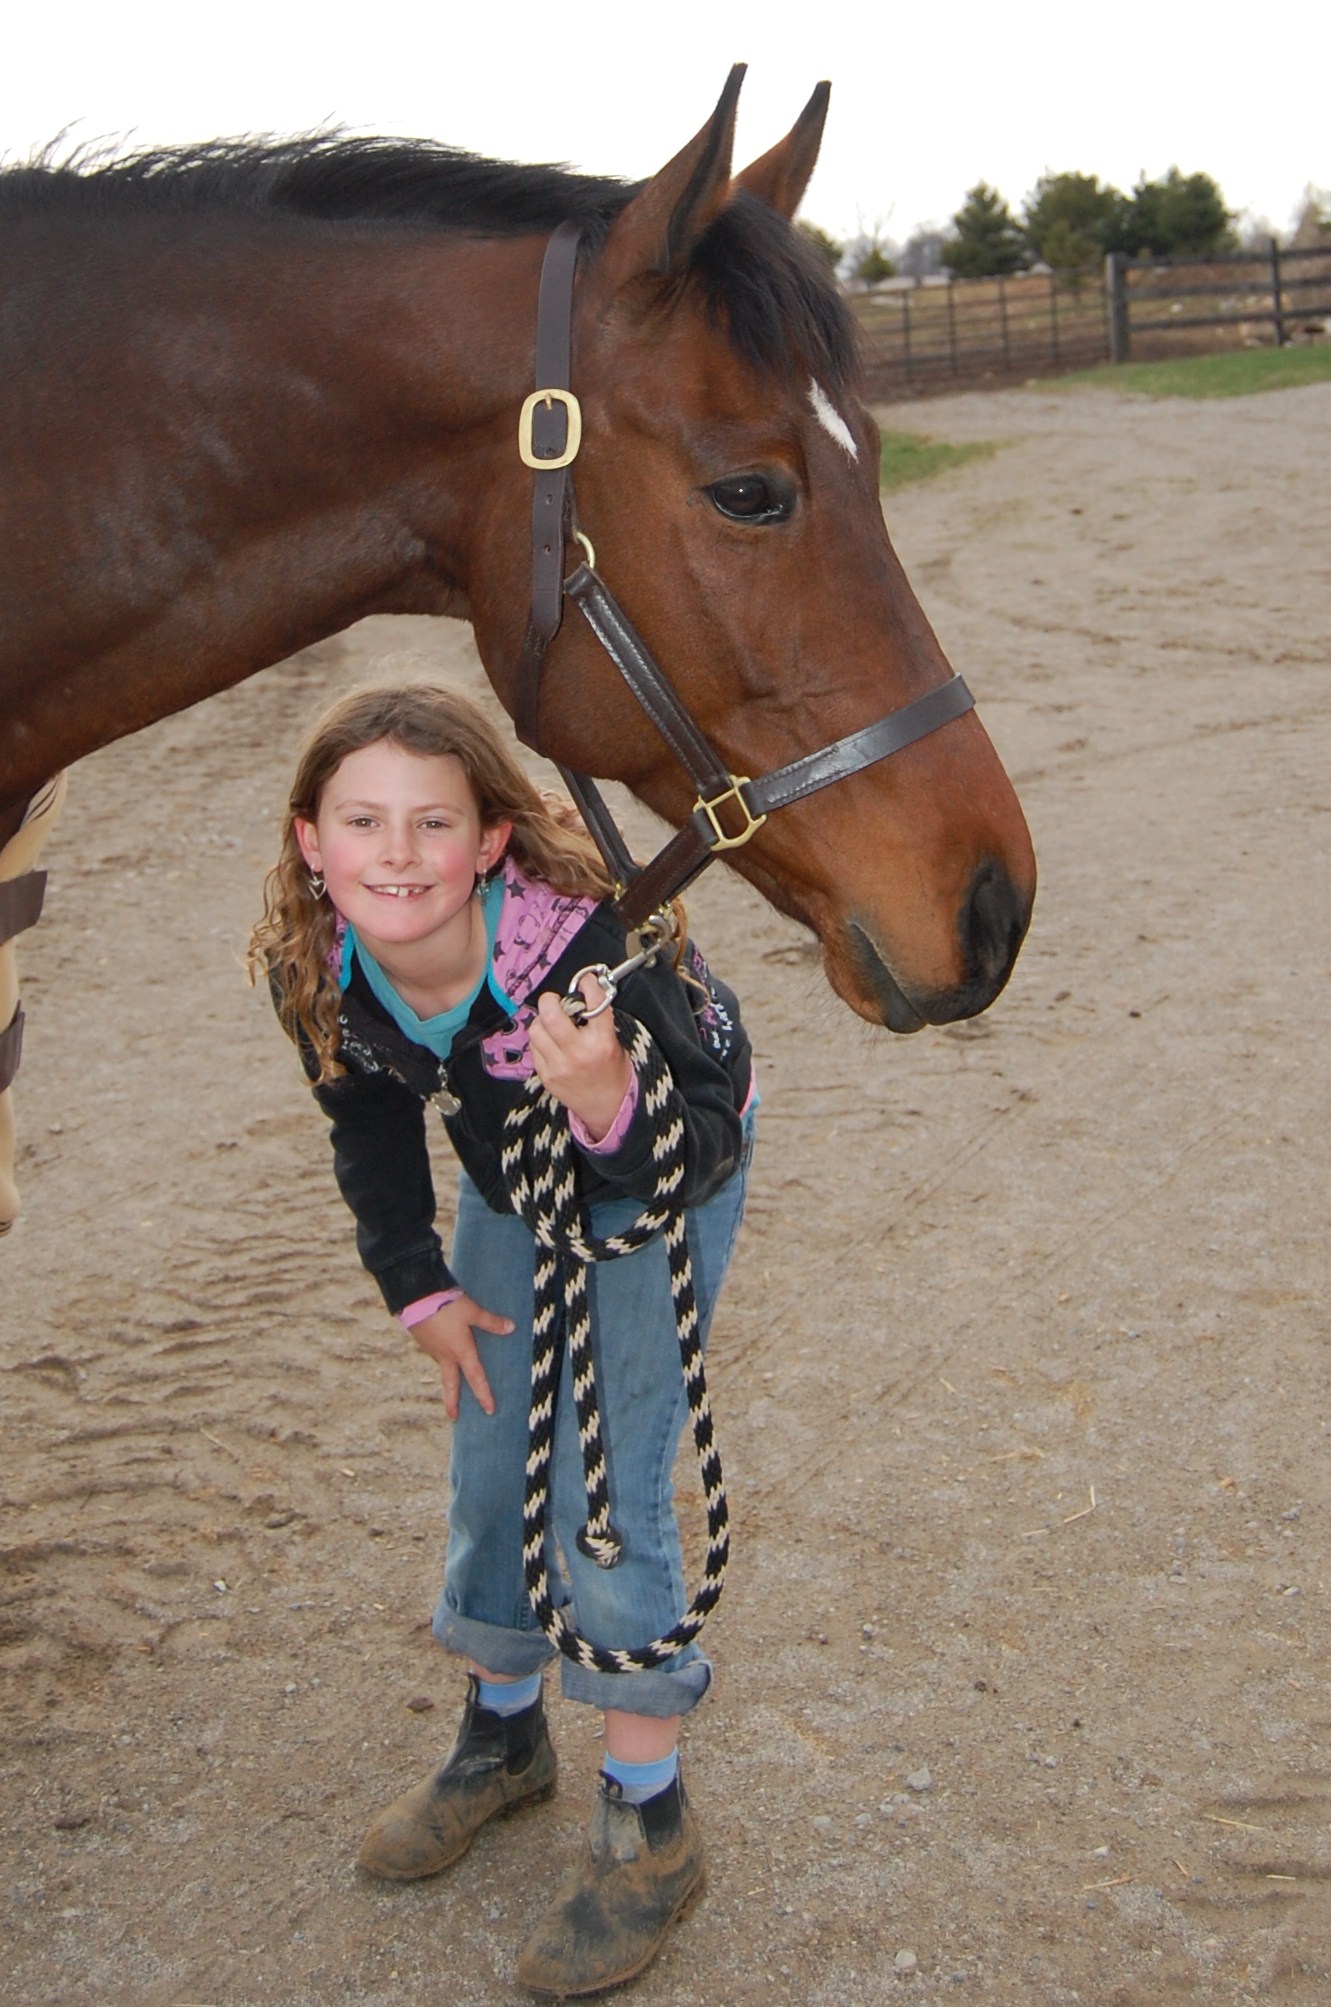 A young girl and a horse